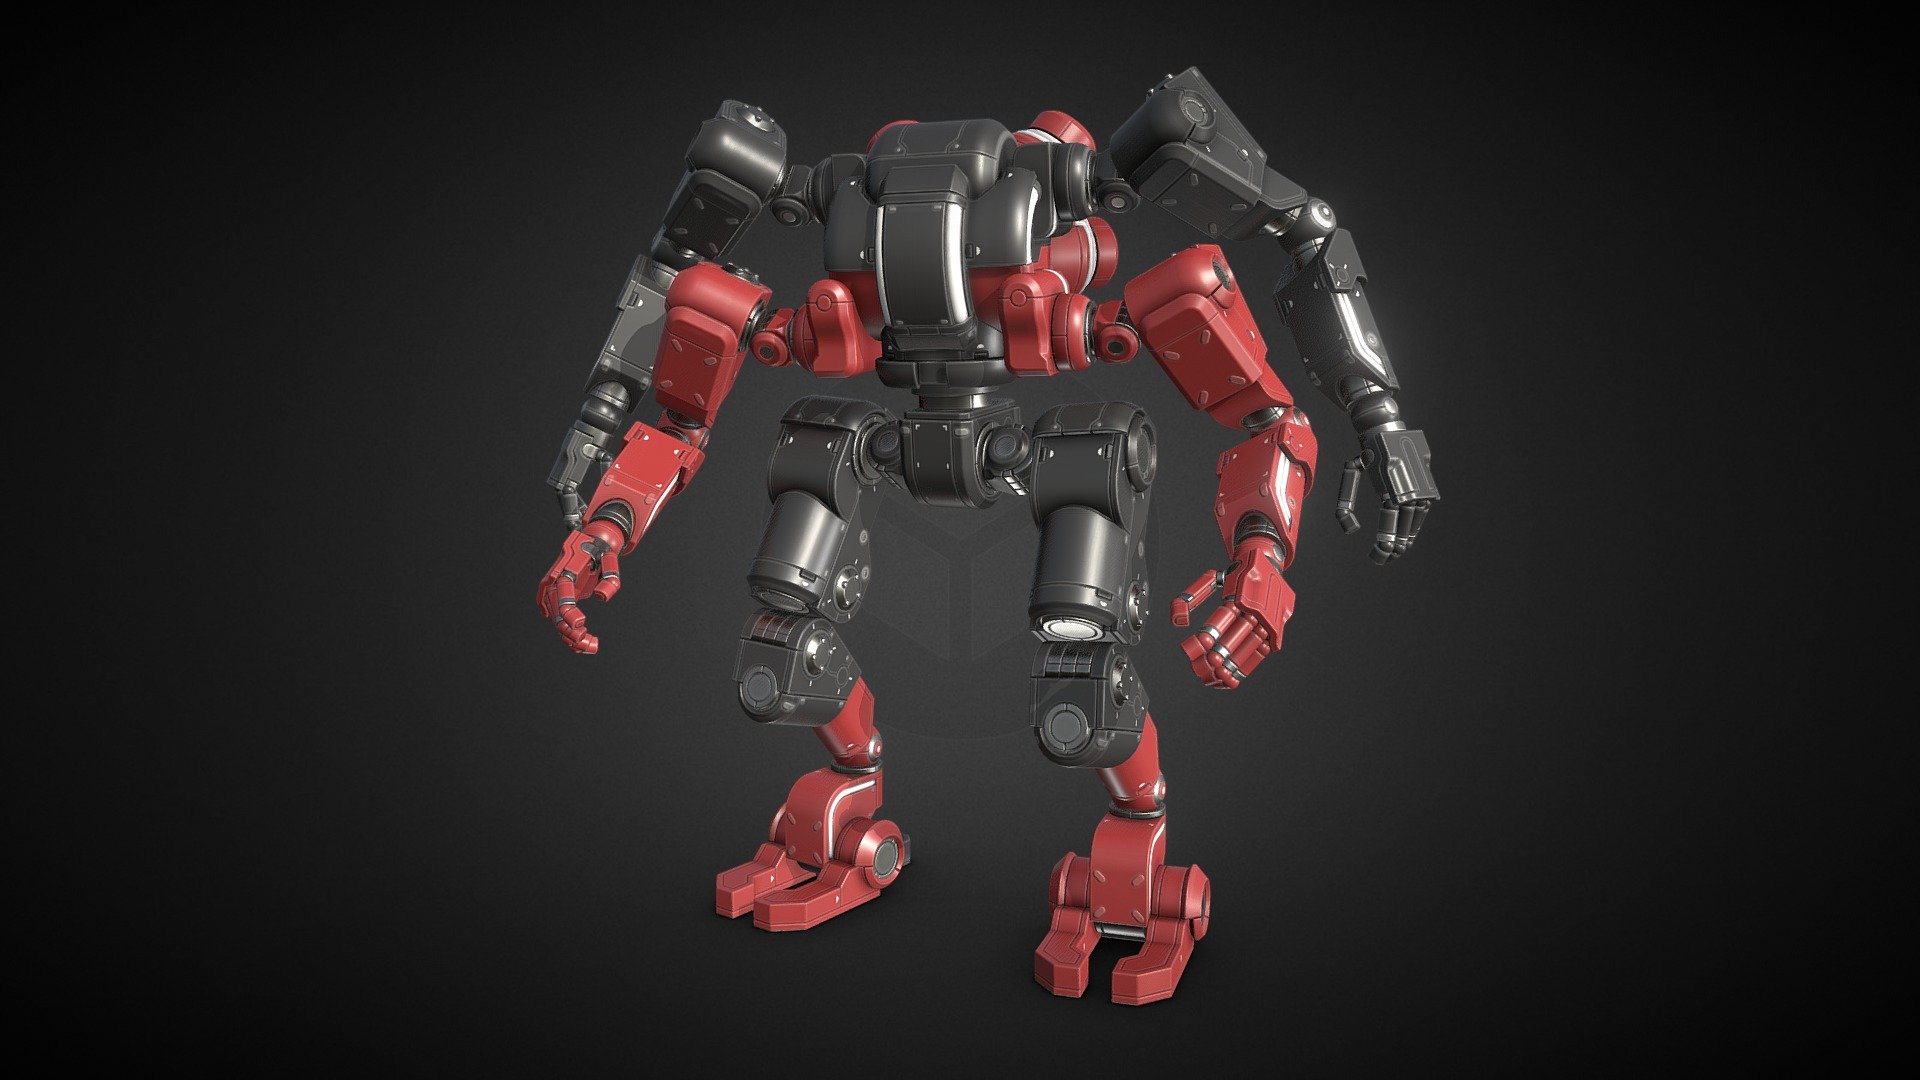 Quadextra Heavy Assault Mecha uses L600 and M200 Fuel Cells. It's main weapons are R12 Heavy Rail Accelerator and P11 Plasma Cutter.

High poly concept:



Concept with alternative colors:



Desert color scheme:



Private security color scheme:

 - Quadextra Heavy Assault Mecha - 3D model by QuakeShambler 3d model